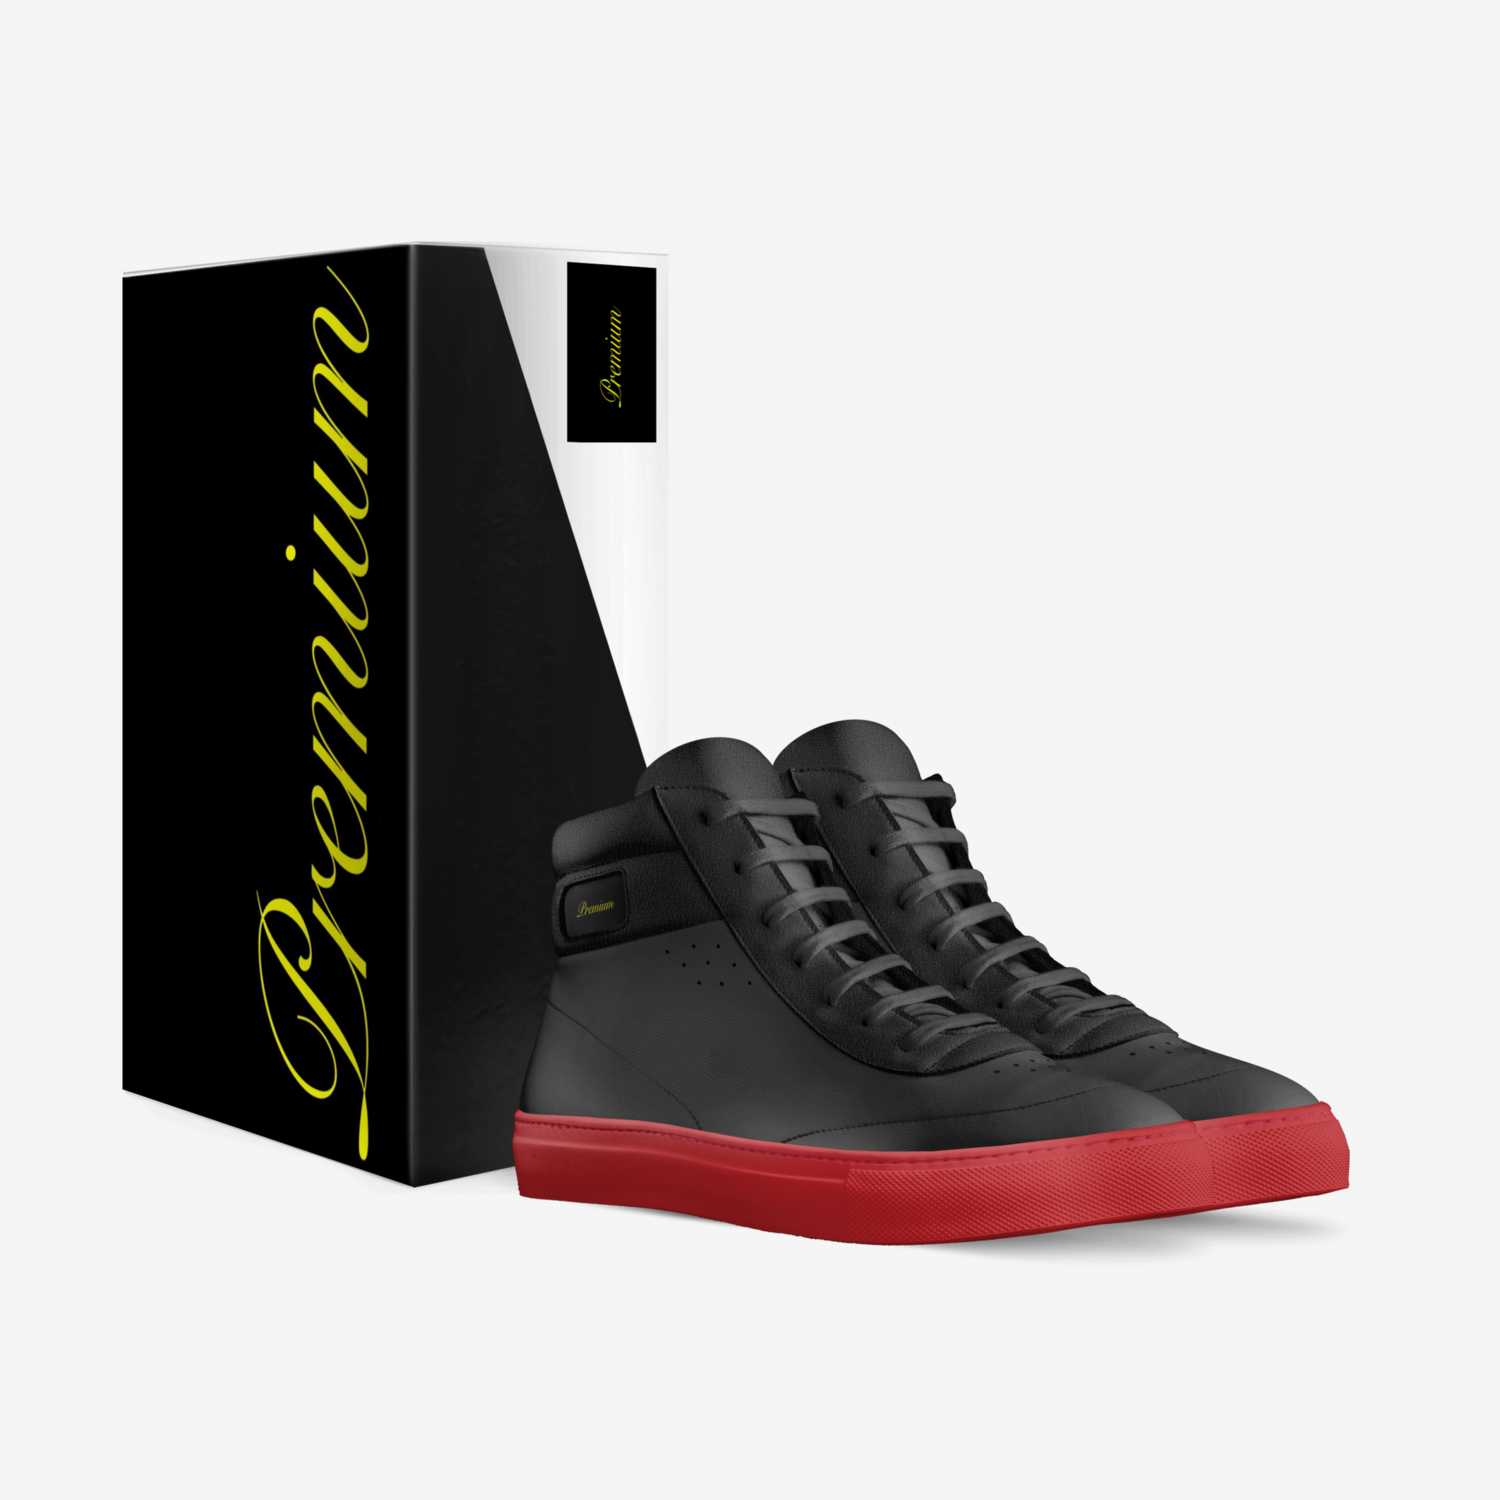 Premium custom made in Italy shoes by Damion Cojulun | Box view